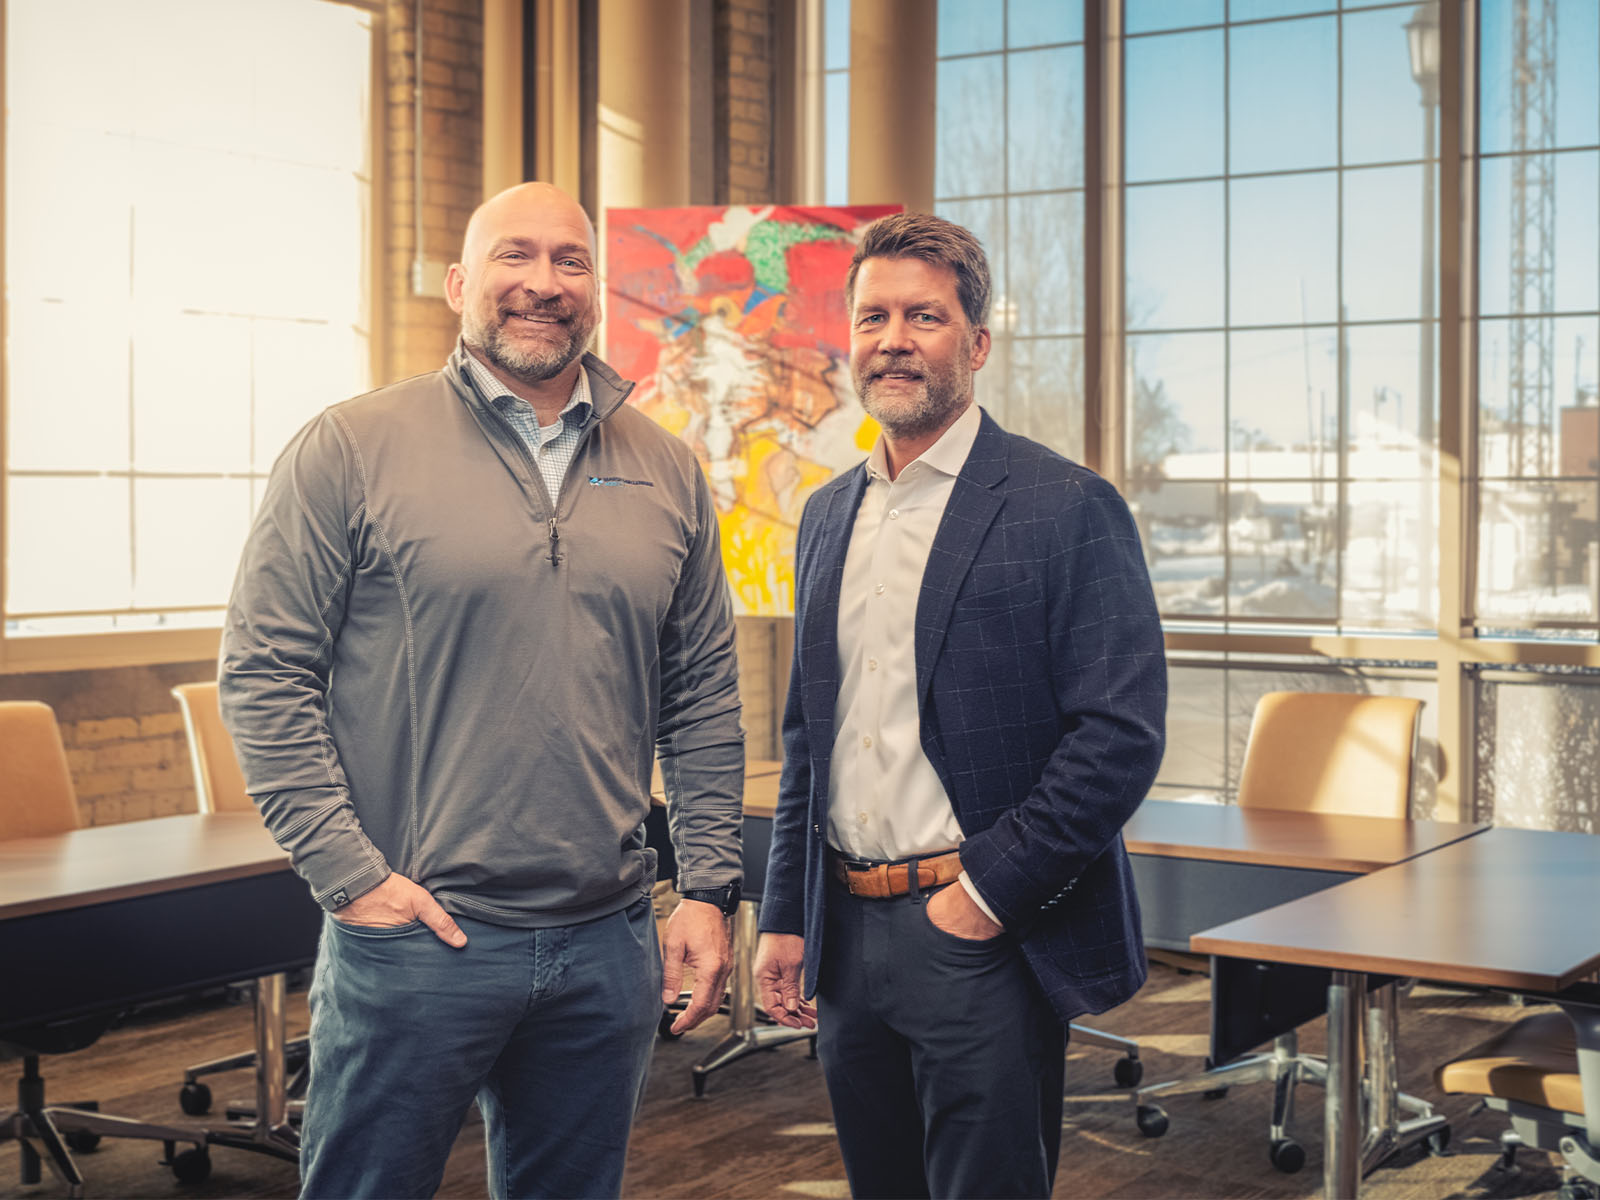 Ryan Hoffman, Vice President at Dawson Insurance (L) and Steve Swanson, Vice President at Vaaler Insurance (R), both agencies now a part of the Marsh McLennan Agency family